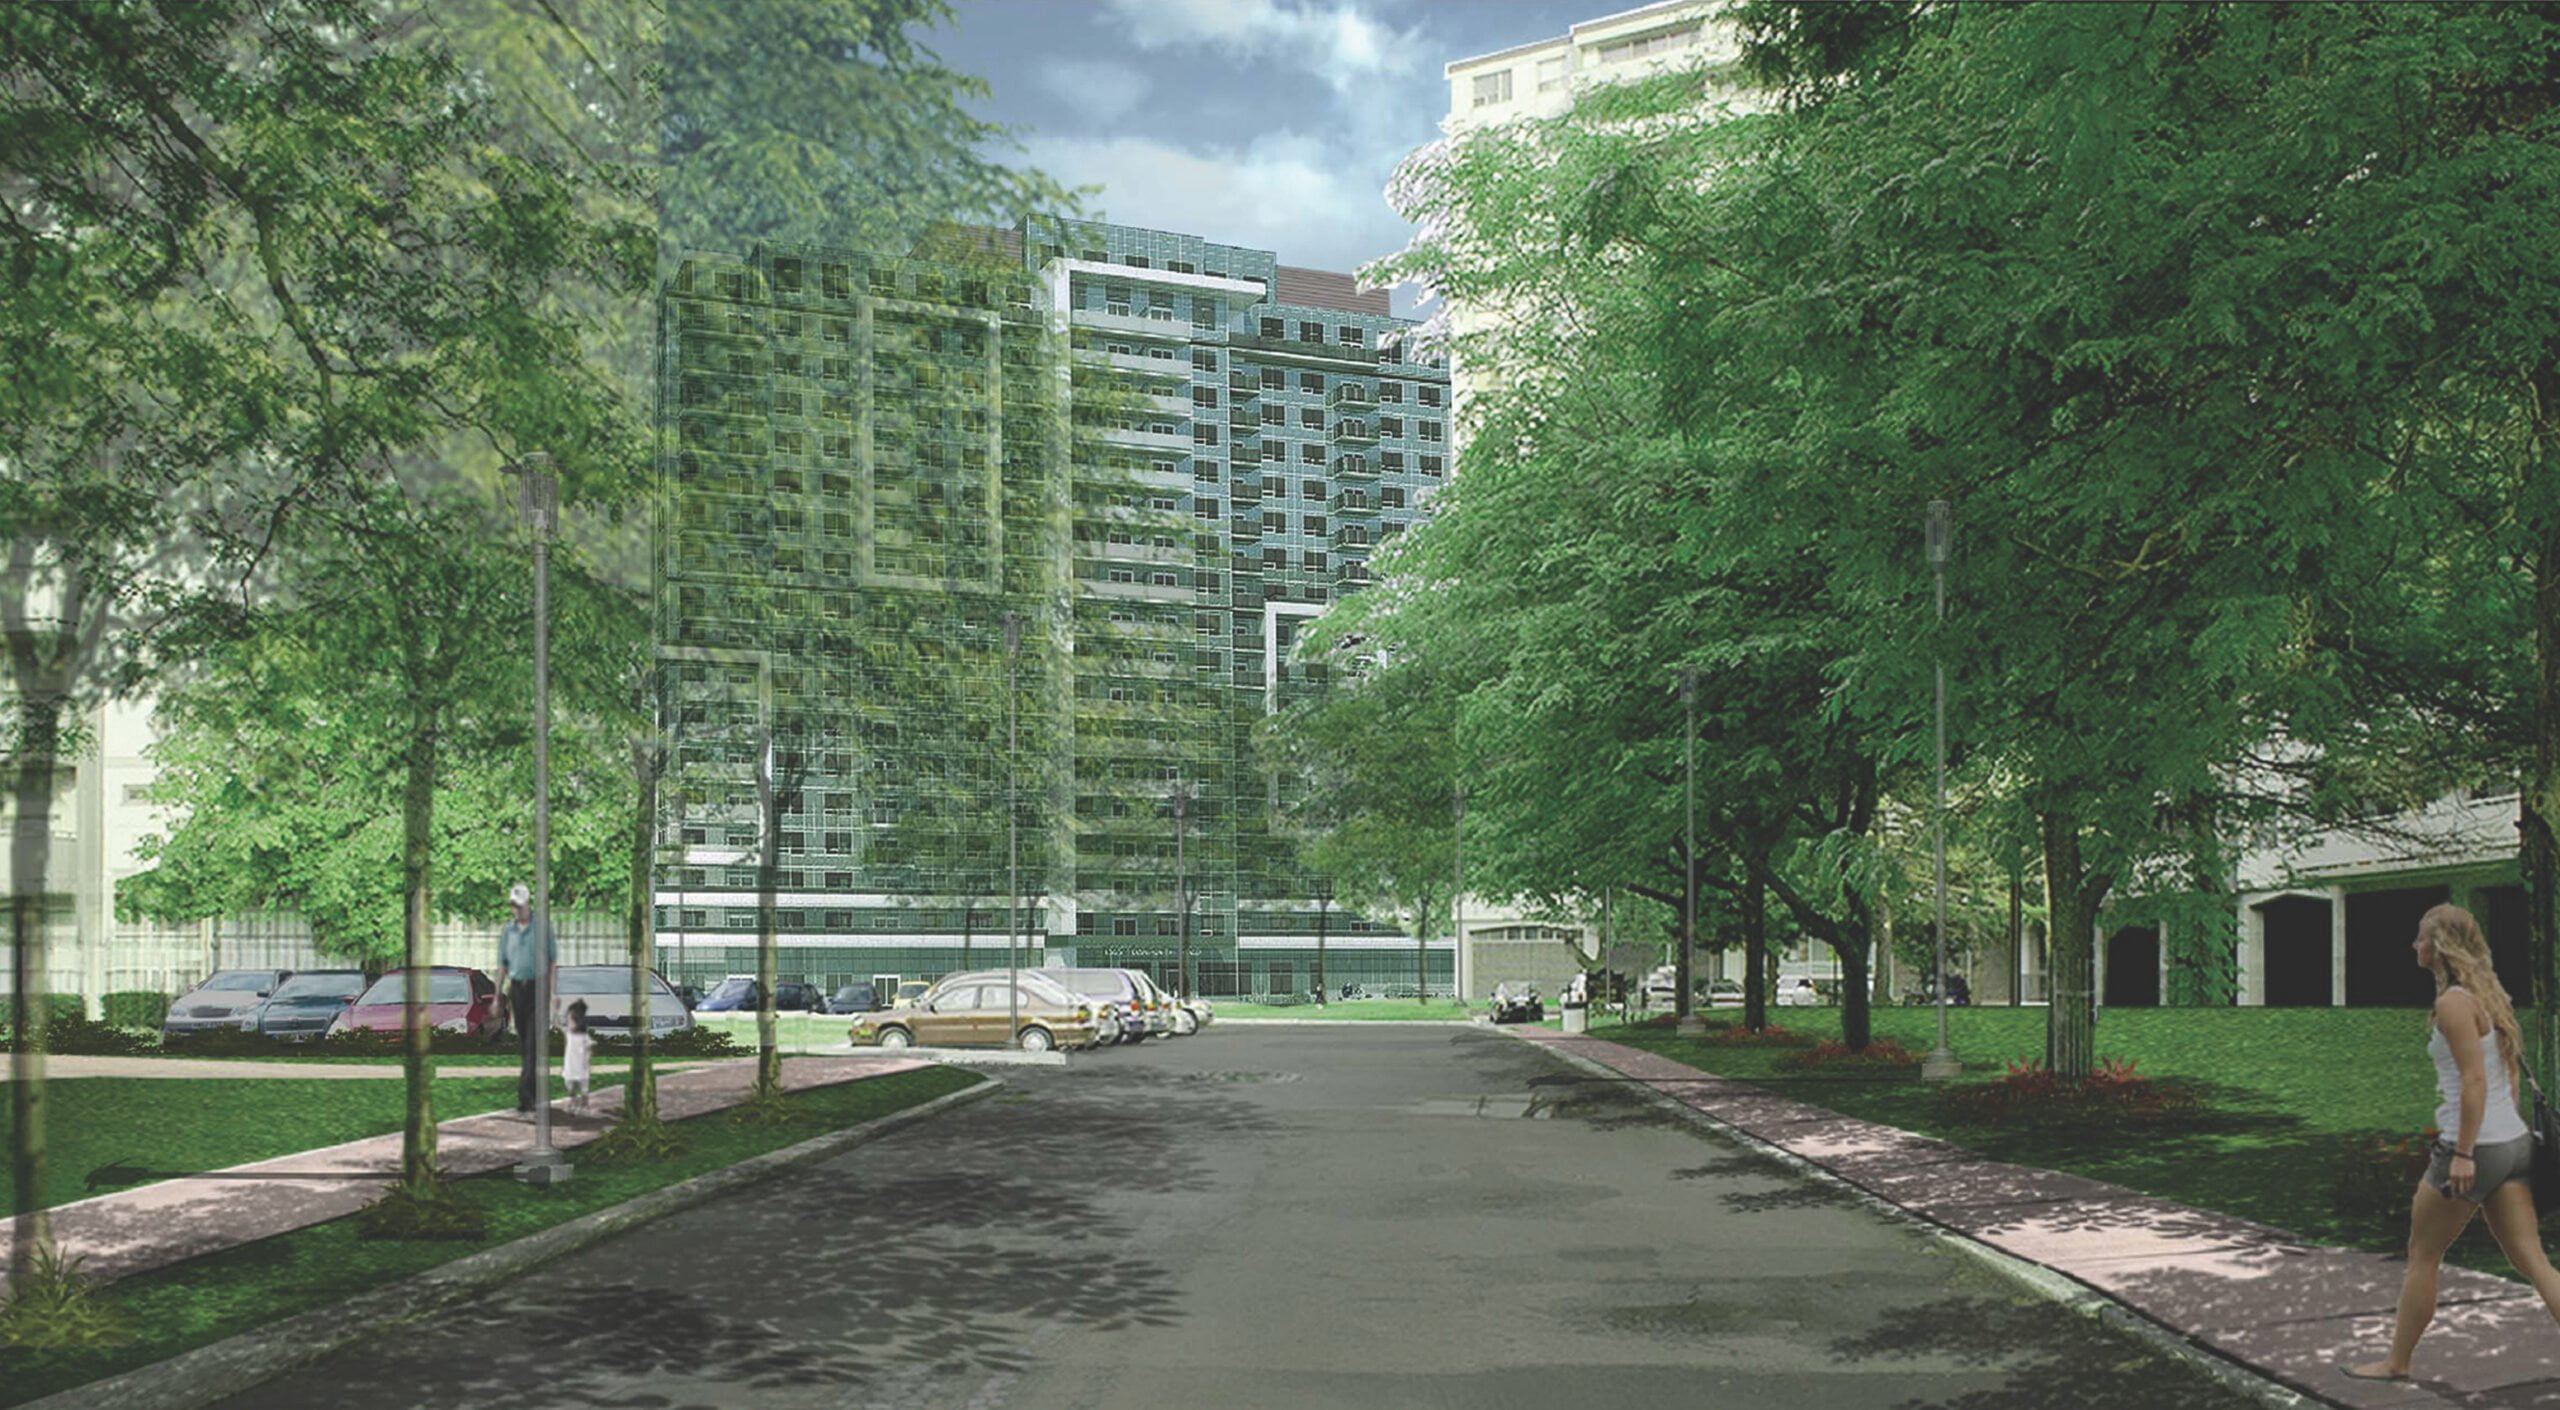 Rendering of Danforth Village where someone is walking by.